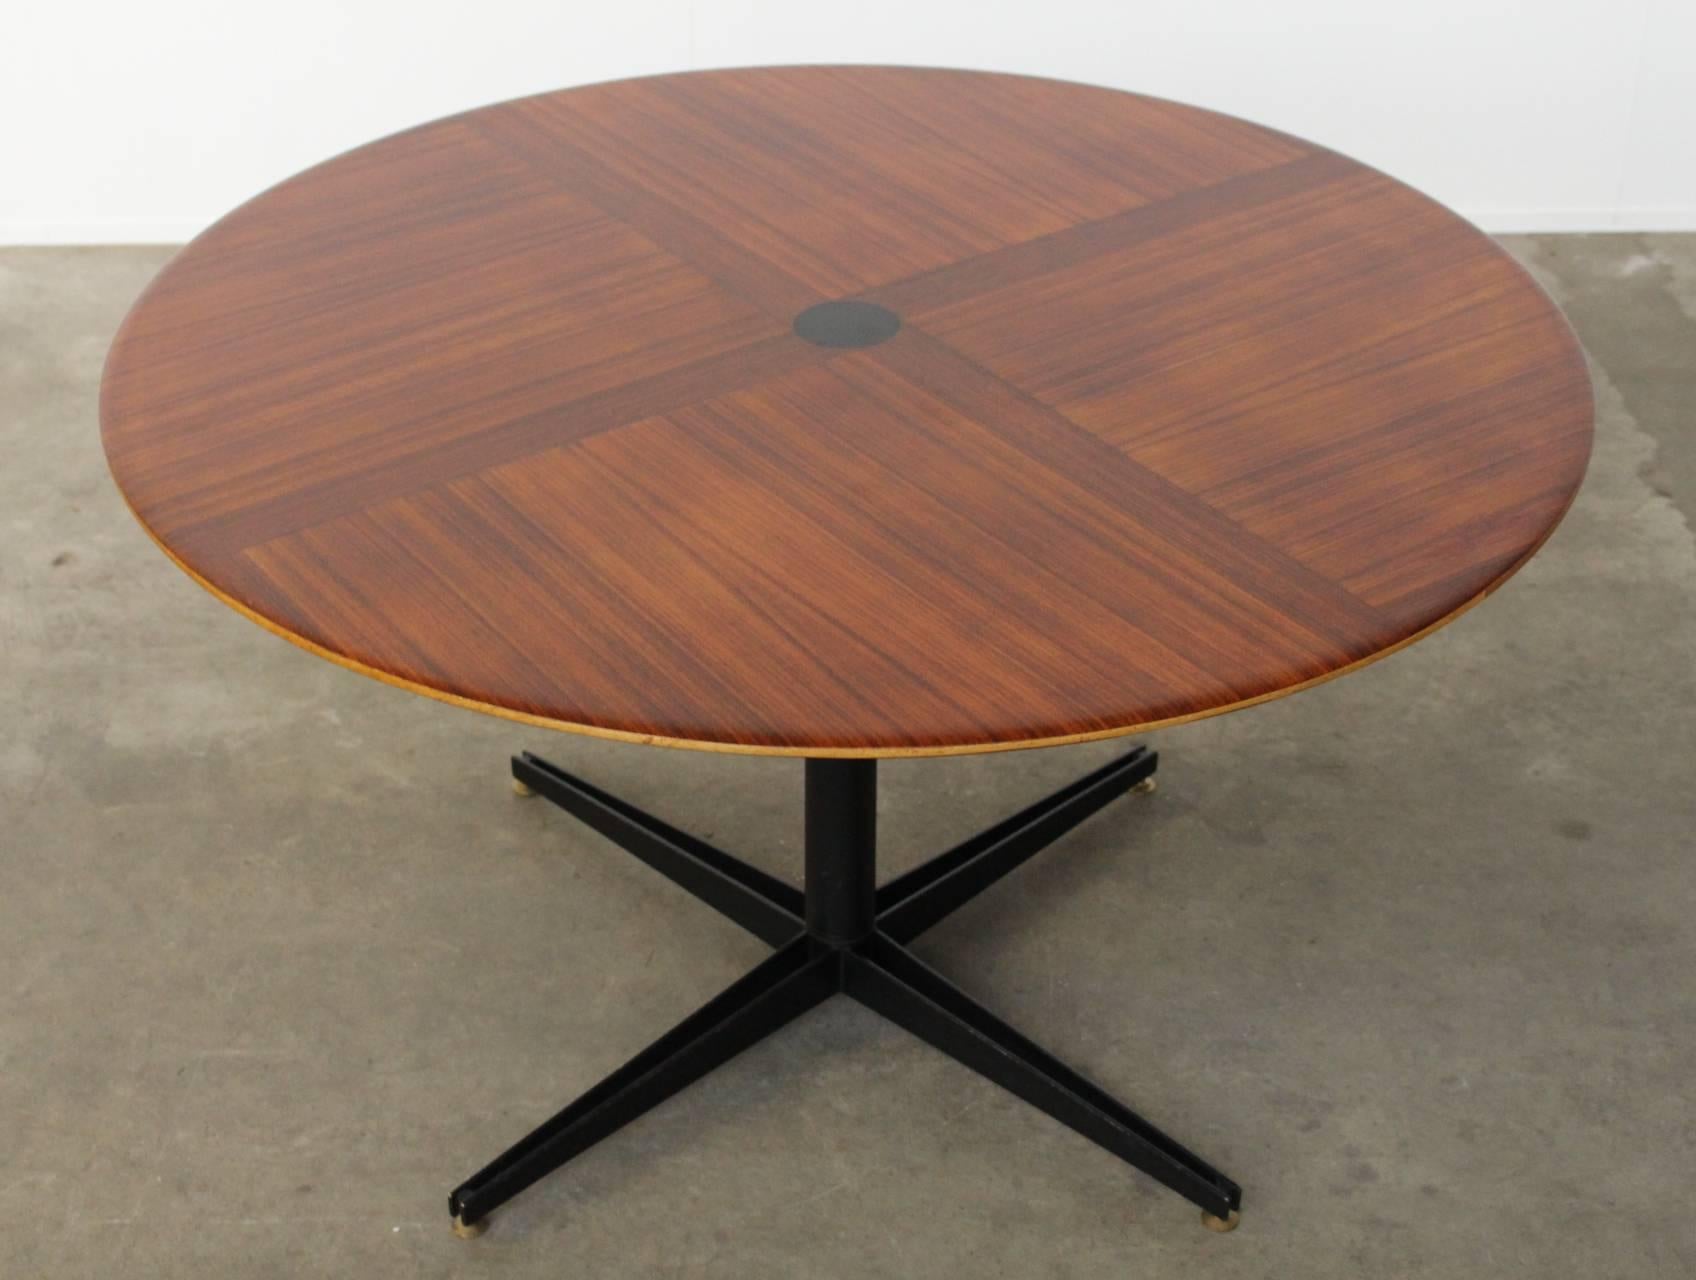 Rare adjustable table T41 by Italian designer Osvaldo Borsani for Tecno with an enamelled steel base and rosewood top with the distinctive large coromandel dot in the center. The table can be lowered by means of the steel bar underneath the top that